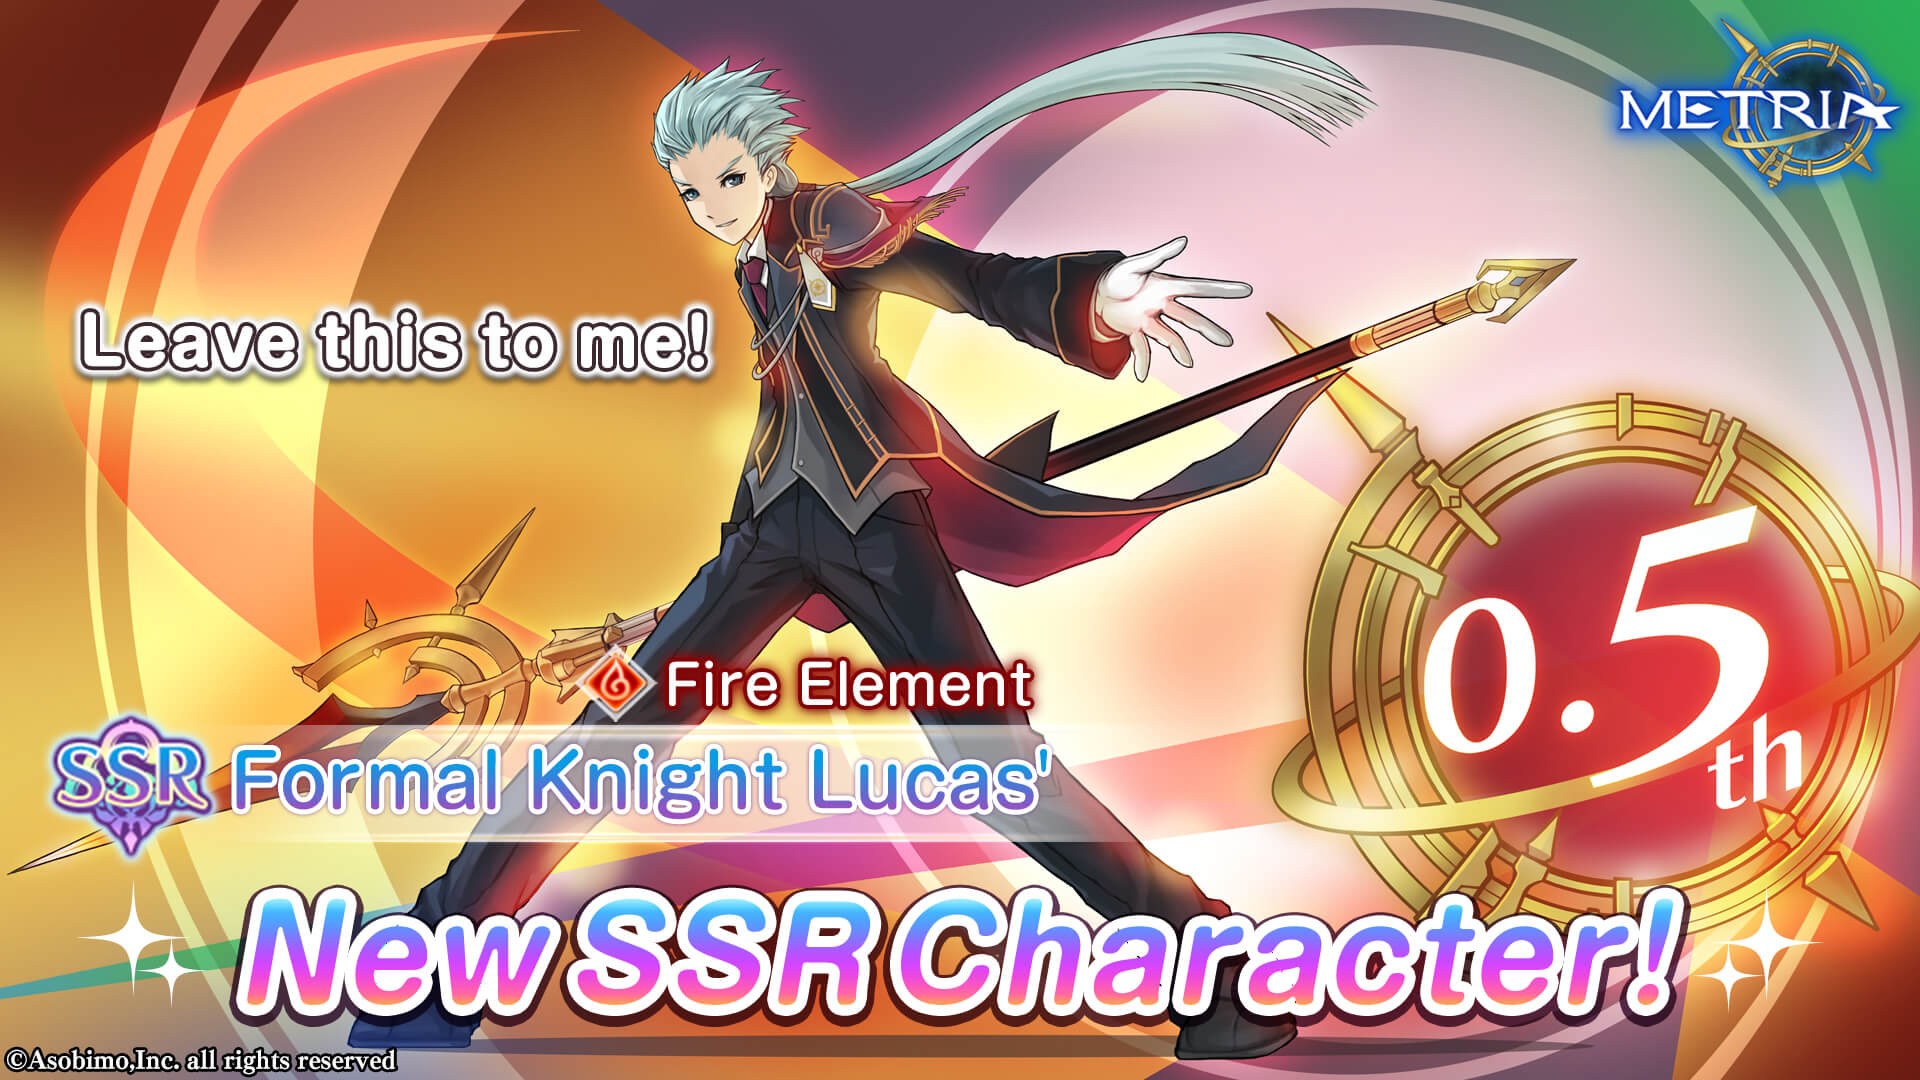 Fire Element! New SSR Character: "Formal Knight Lucas'" Available for Purchase!